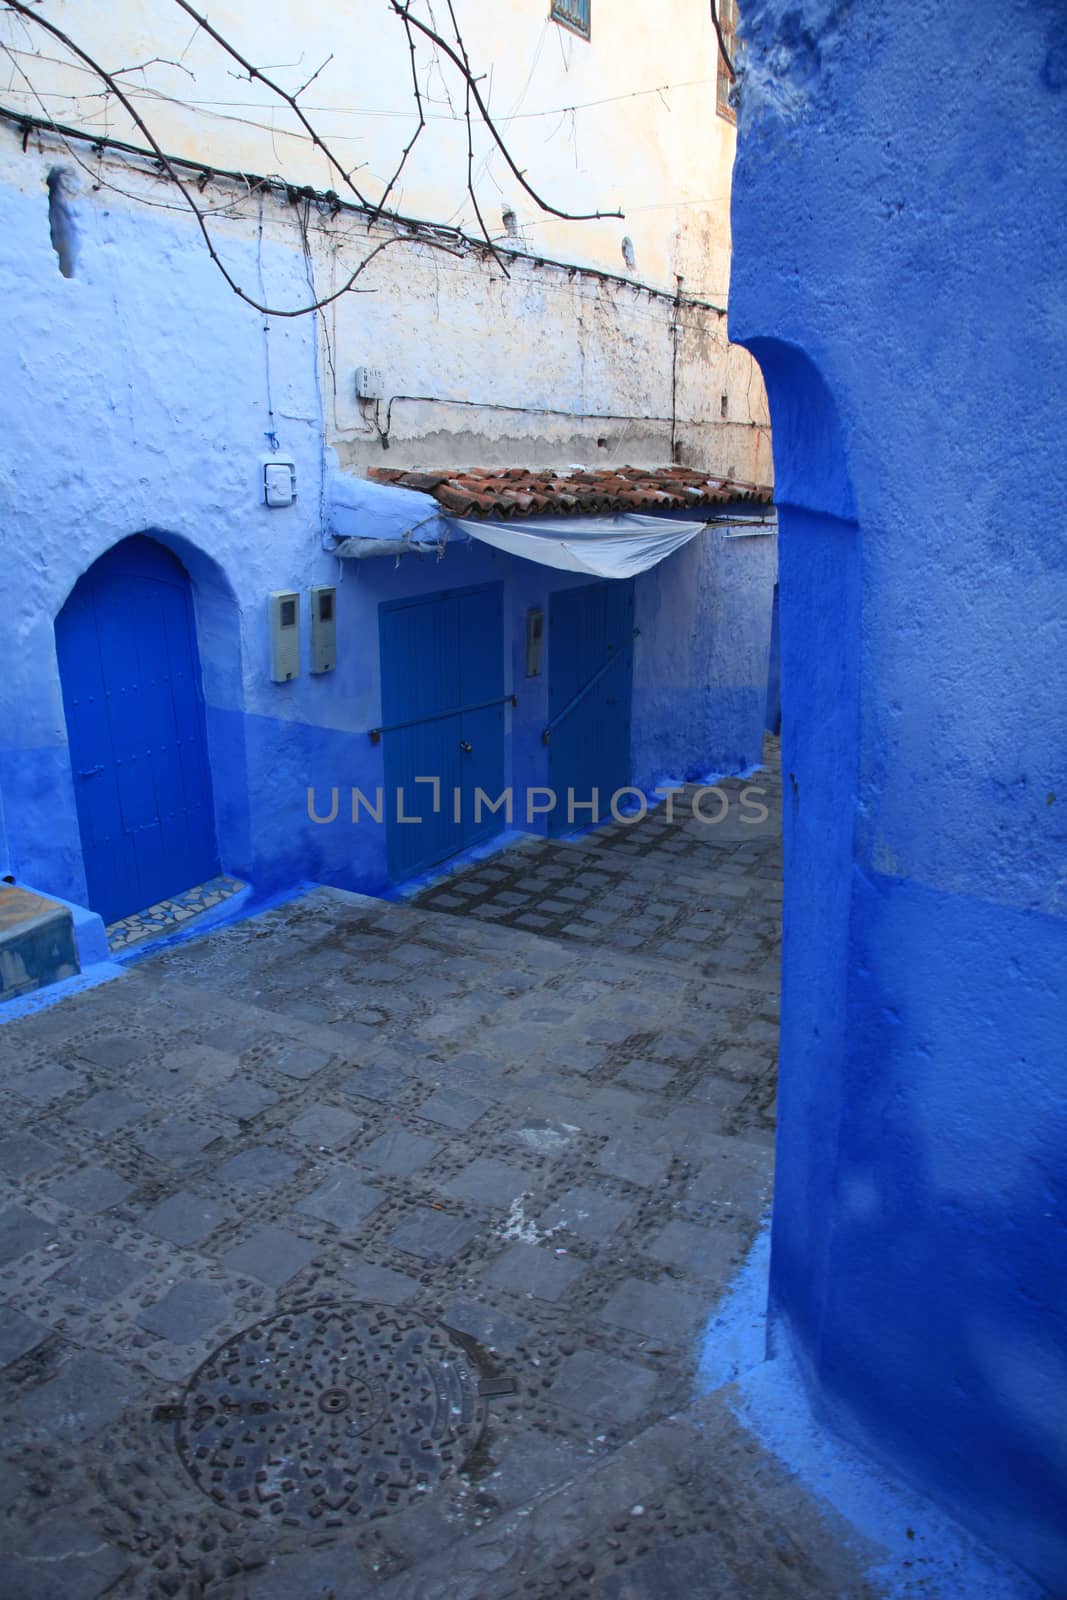 Chefchaouen Traditional Medinas and Colors in Morocco